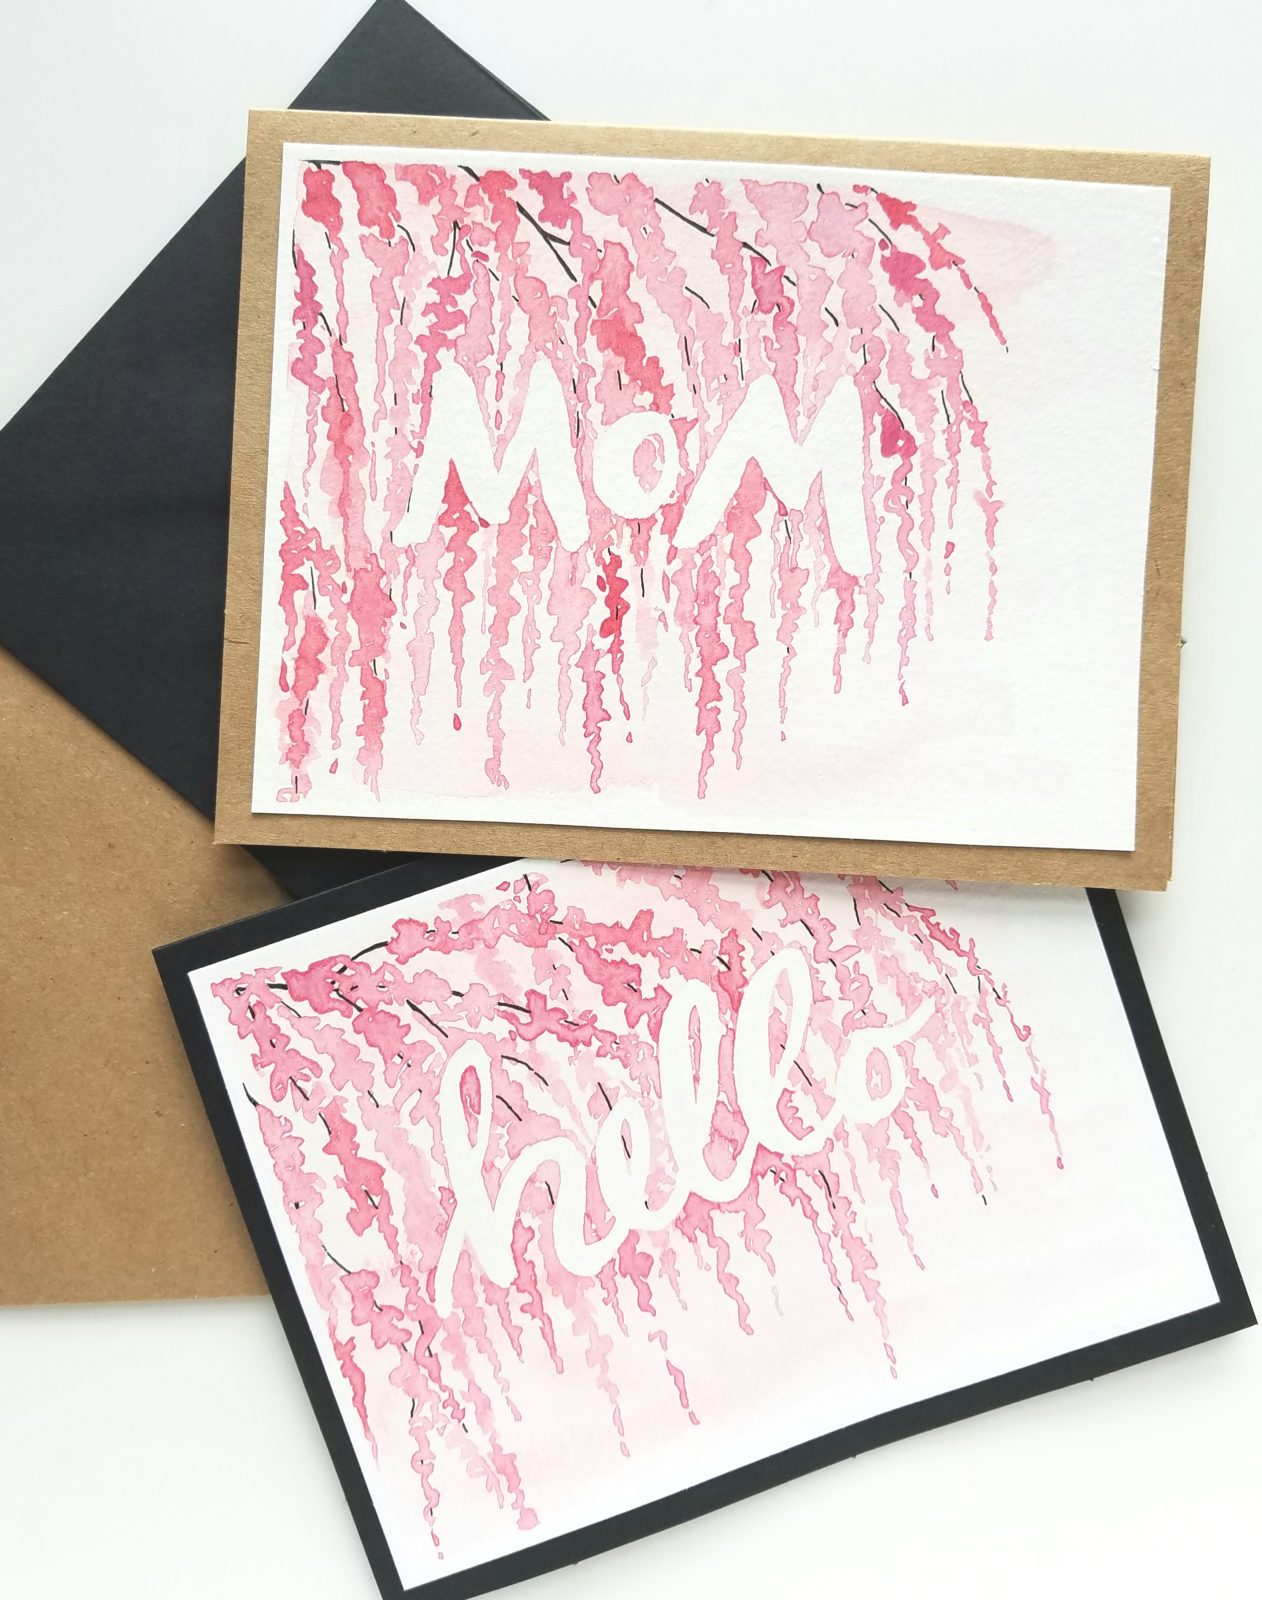 Painting ideas for Mother's day: 20 Creative painting ideas for mom